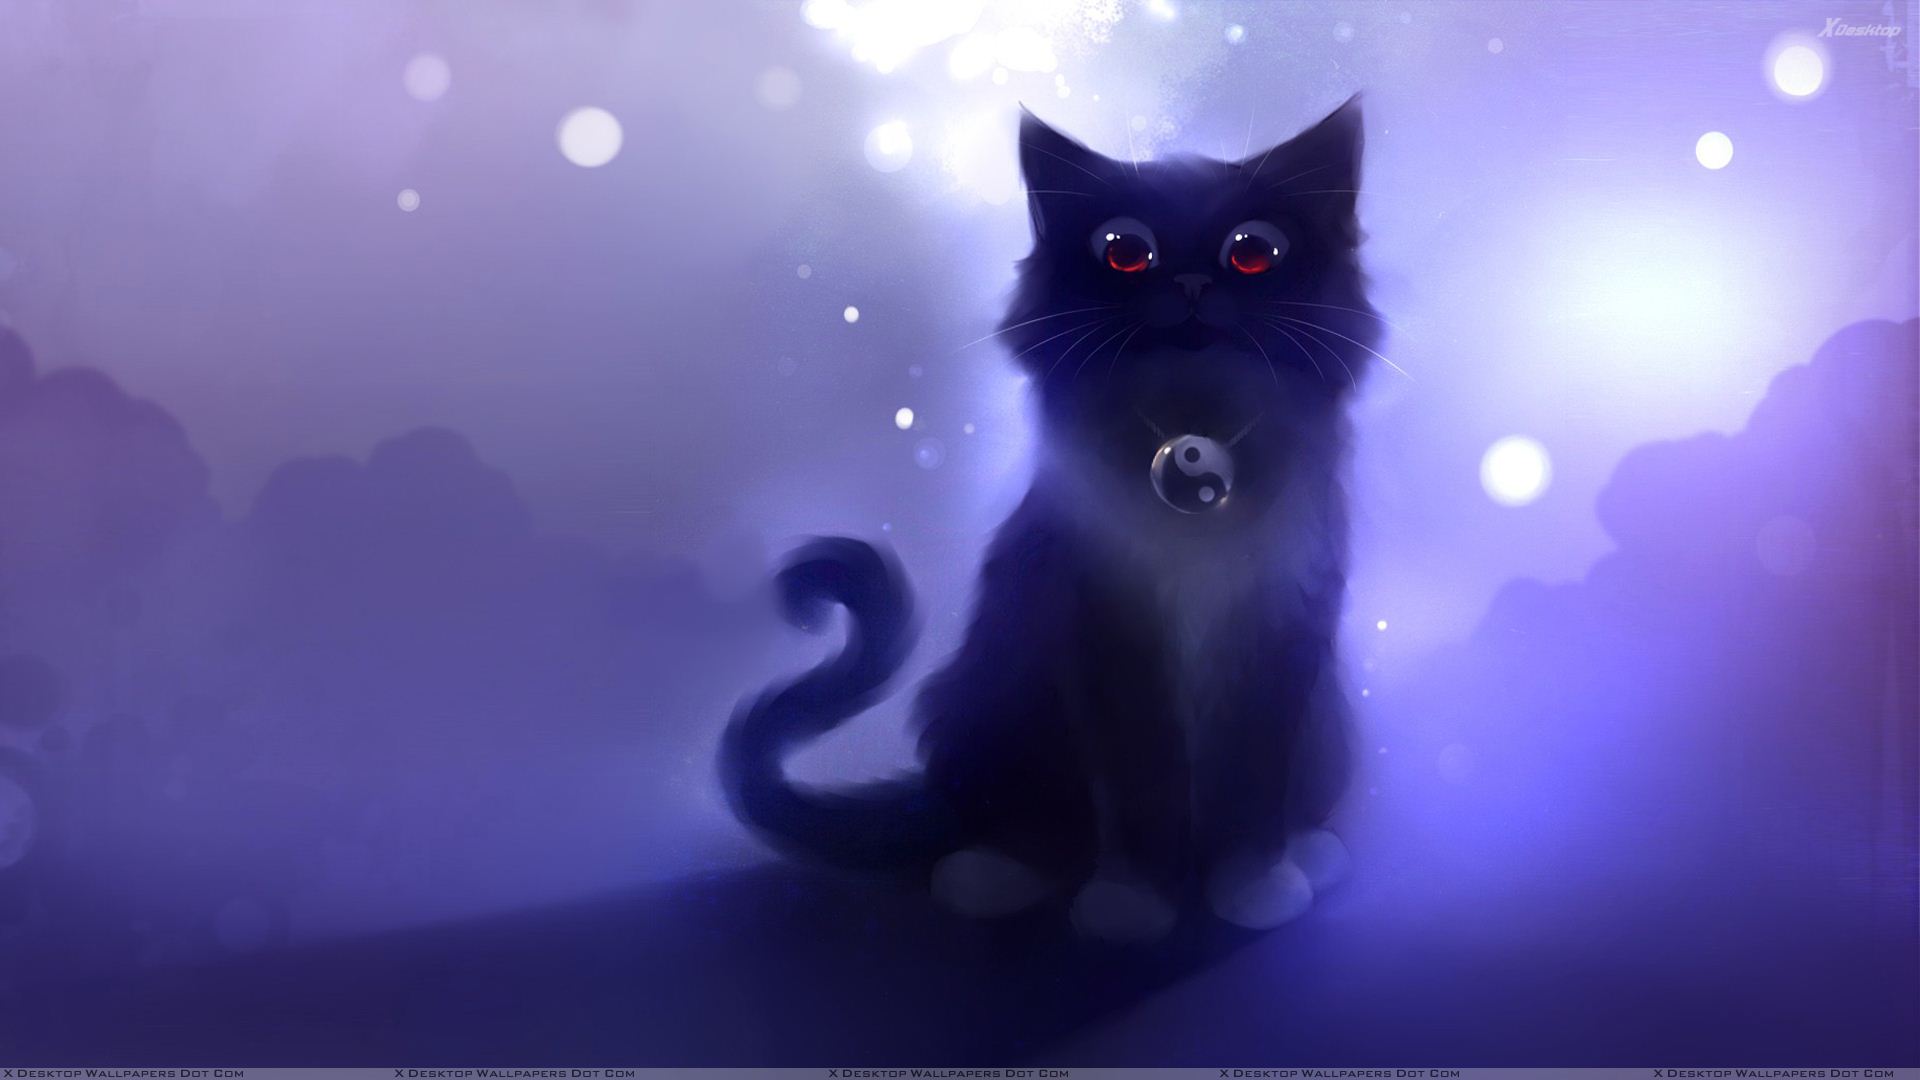 Black Cats Wallpapers Photos Images in HD 1920x1080